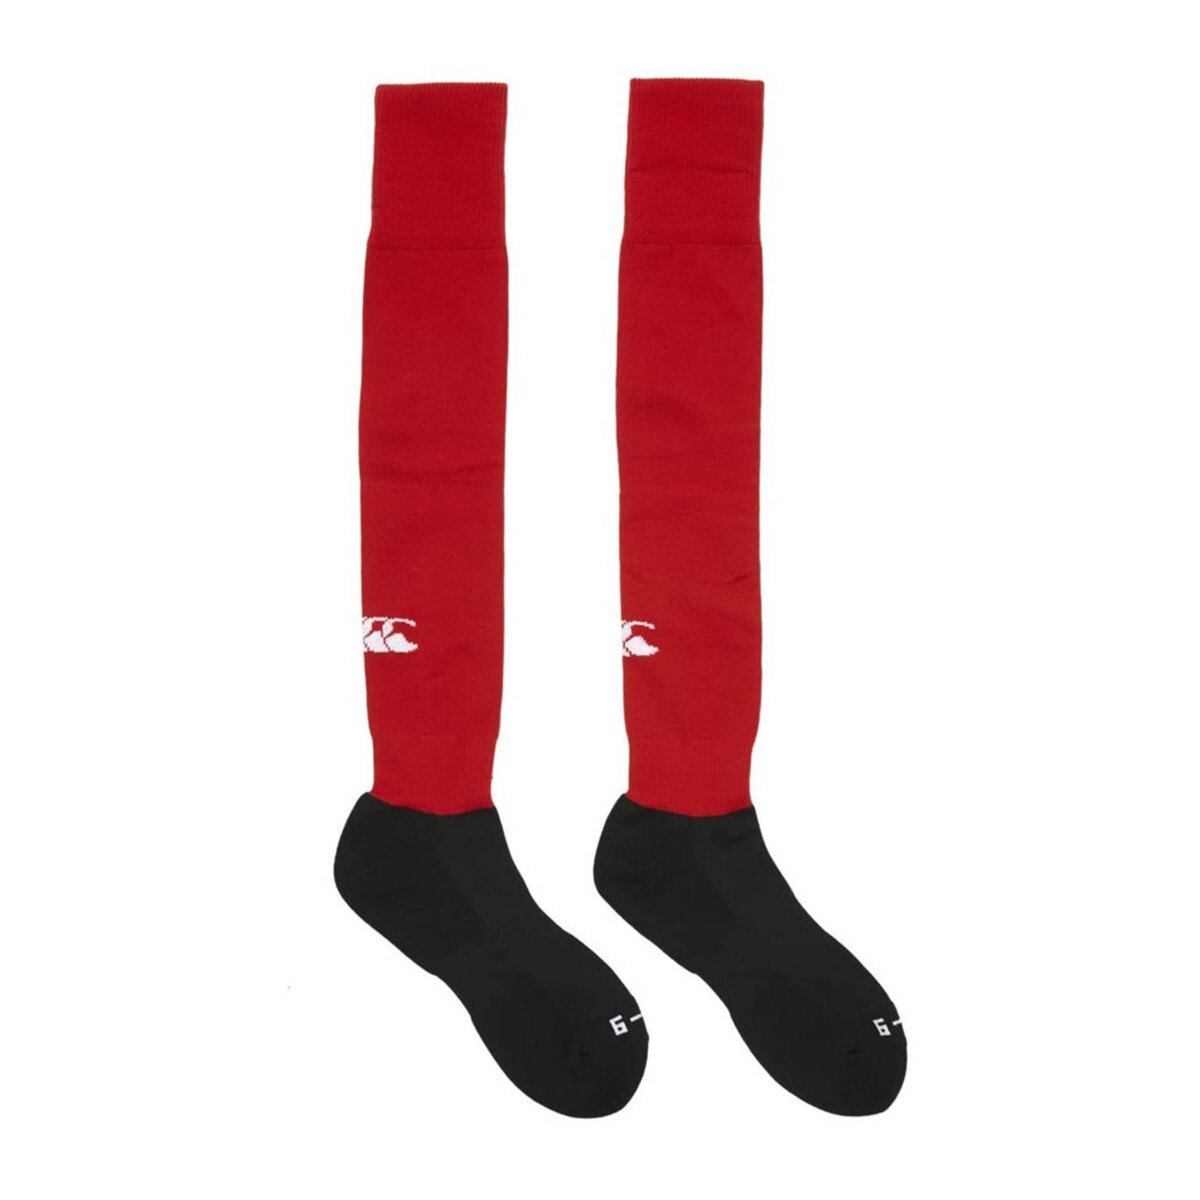 CANTERBURY Chaussettes de rugby Rouges Homme Canterbury Team